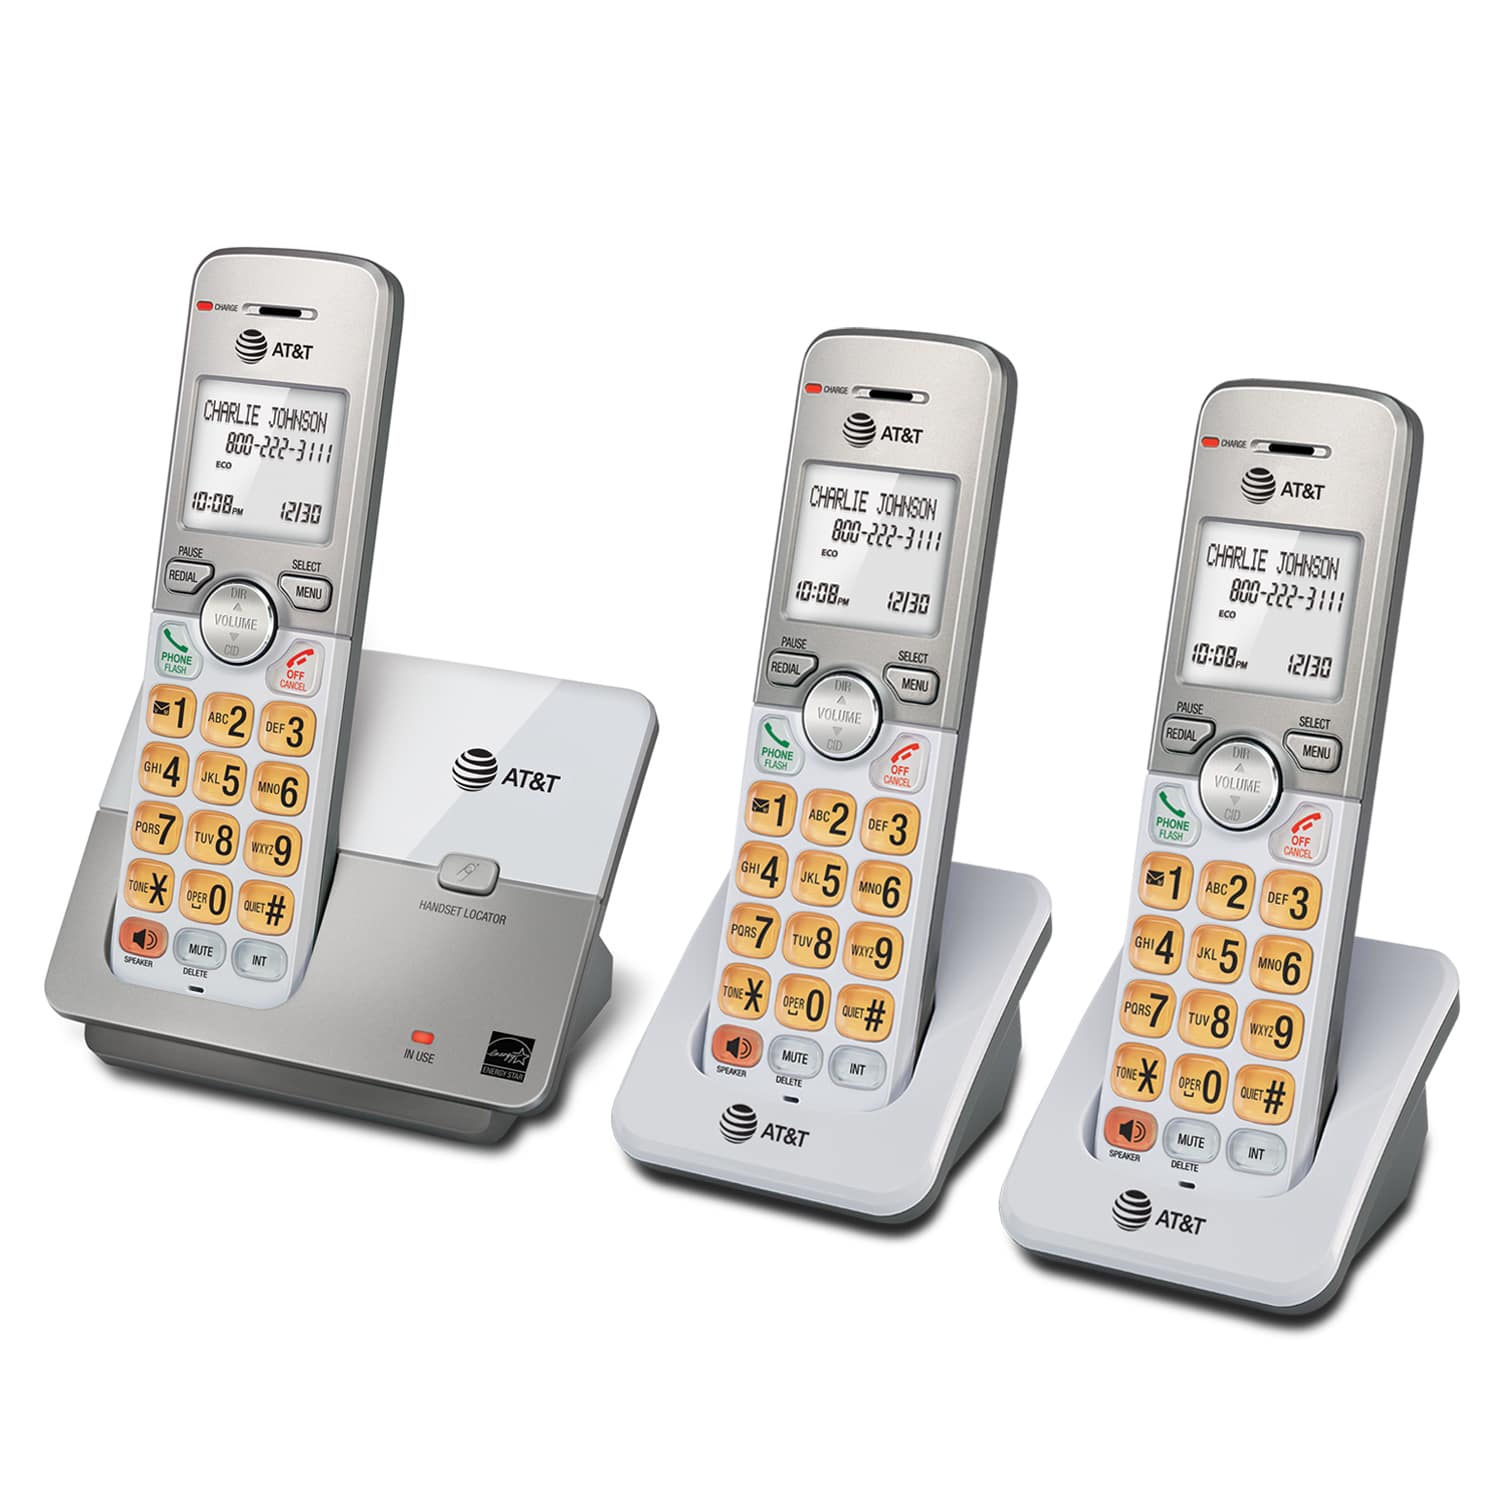 3 handset cordless phone system with caller ID/call waiting - view 3